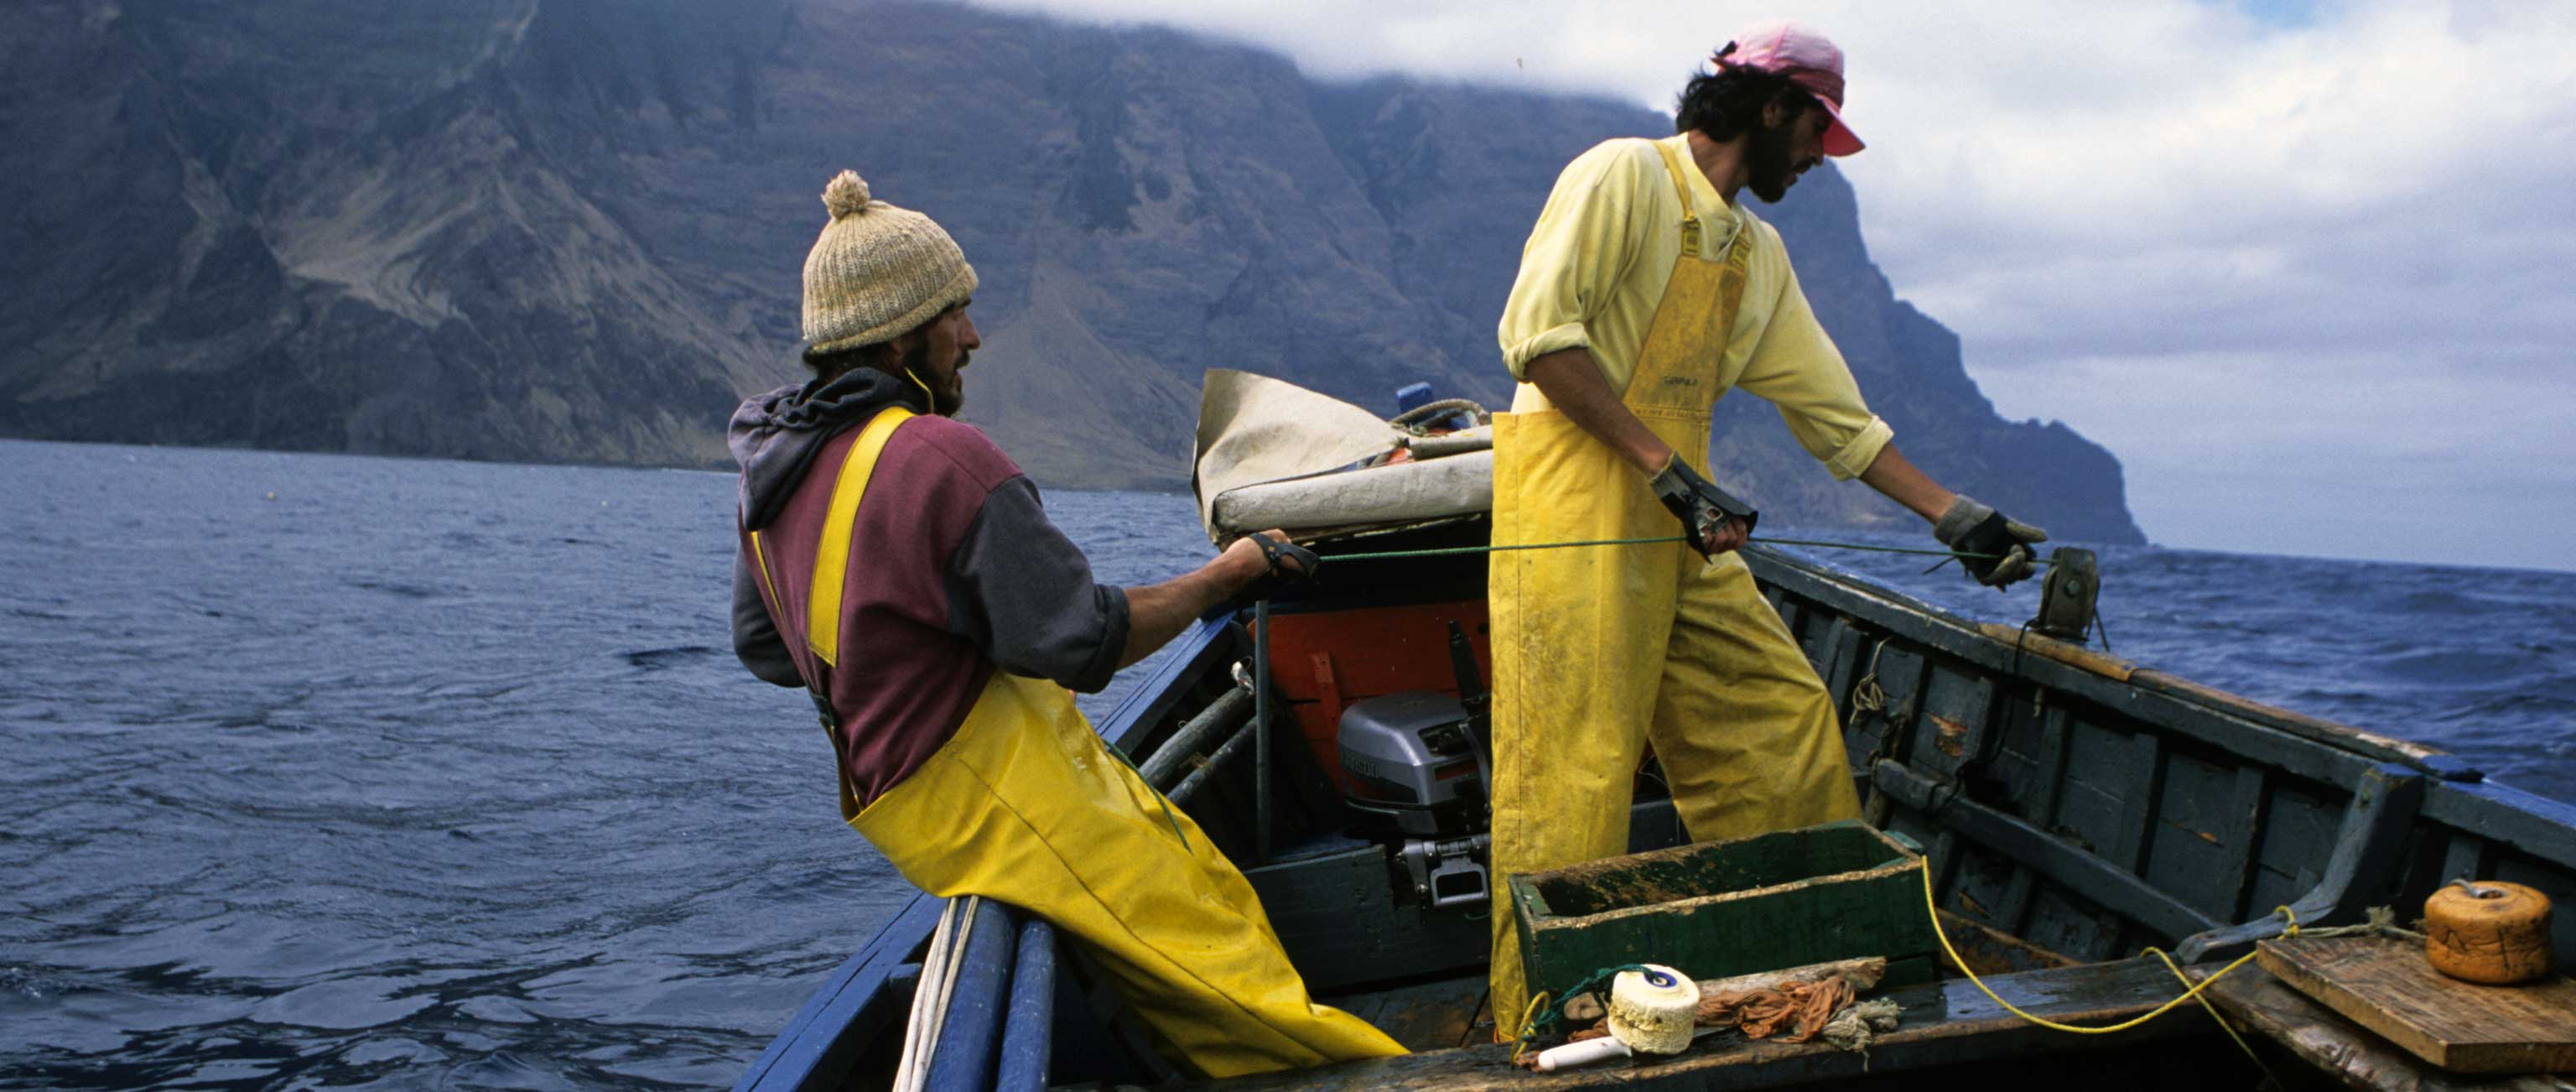 Marine Stewardship Council Labeling and the Future of Sustainable Fisheries